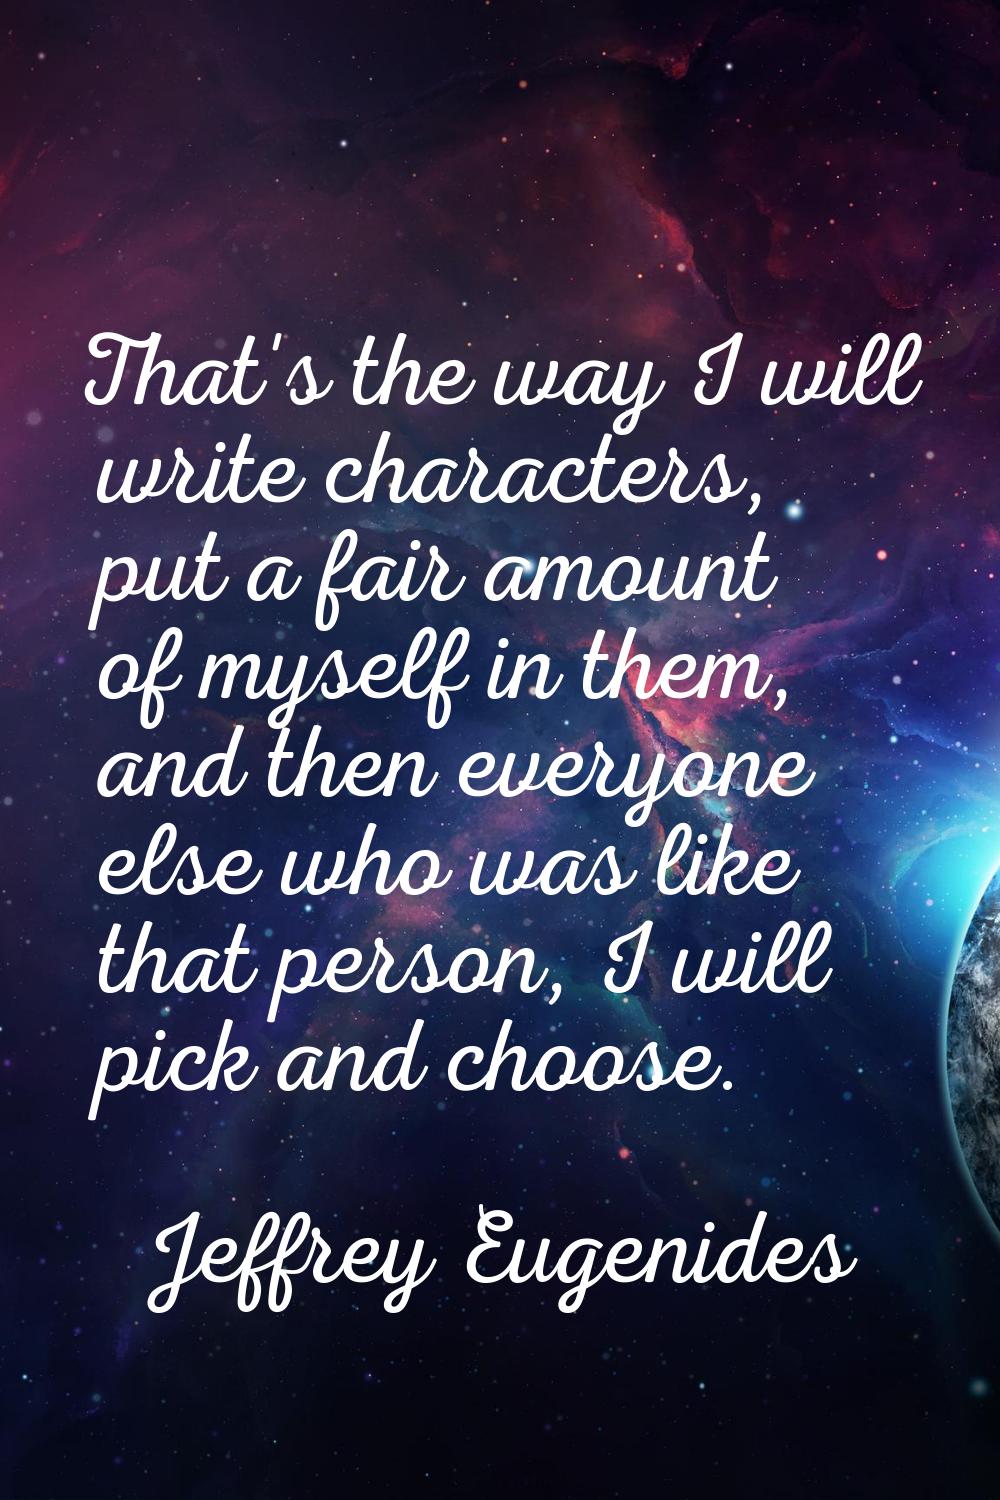 That's the way I will write characters, put a fair amount of myself in them, and then everyone else